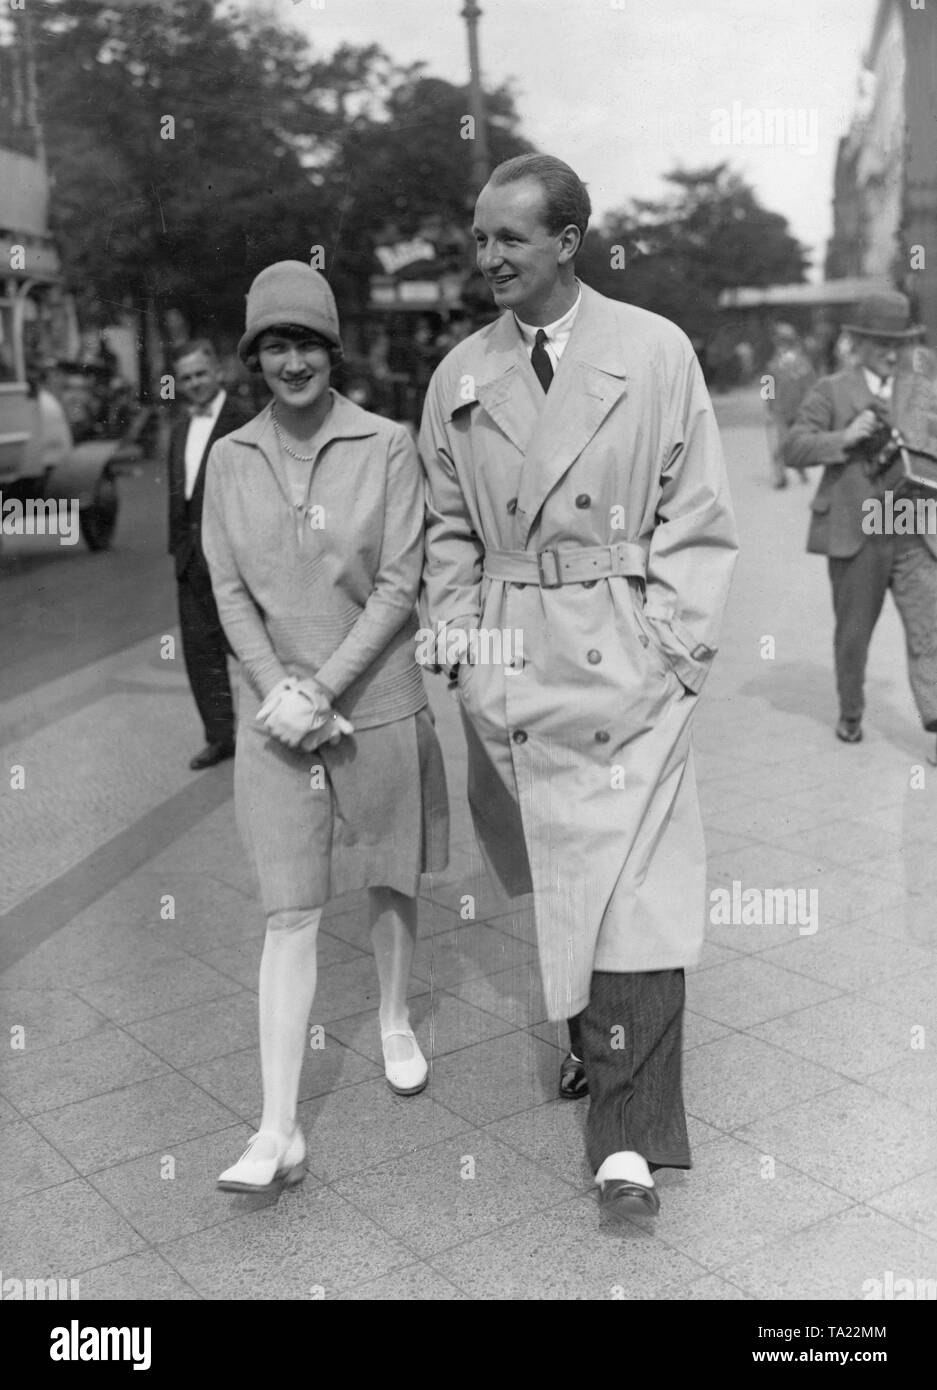 Son of Gerhart Hauptmann, Benvenuto Hauptmann with his future wife Elisabeth Auguste Victoria Hermione Princess of Schaumburg-Lippe. The bride and groom walk on the boulevard Unter den Linden in Berlin, Germany (undated picture) Stock Photo